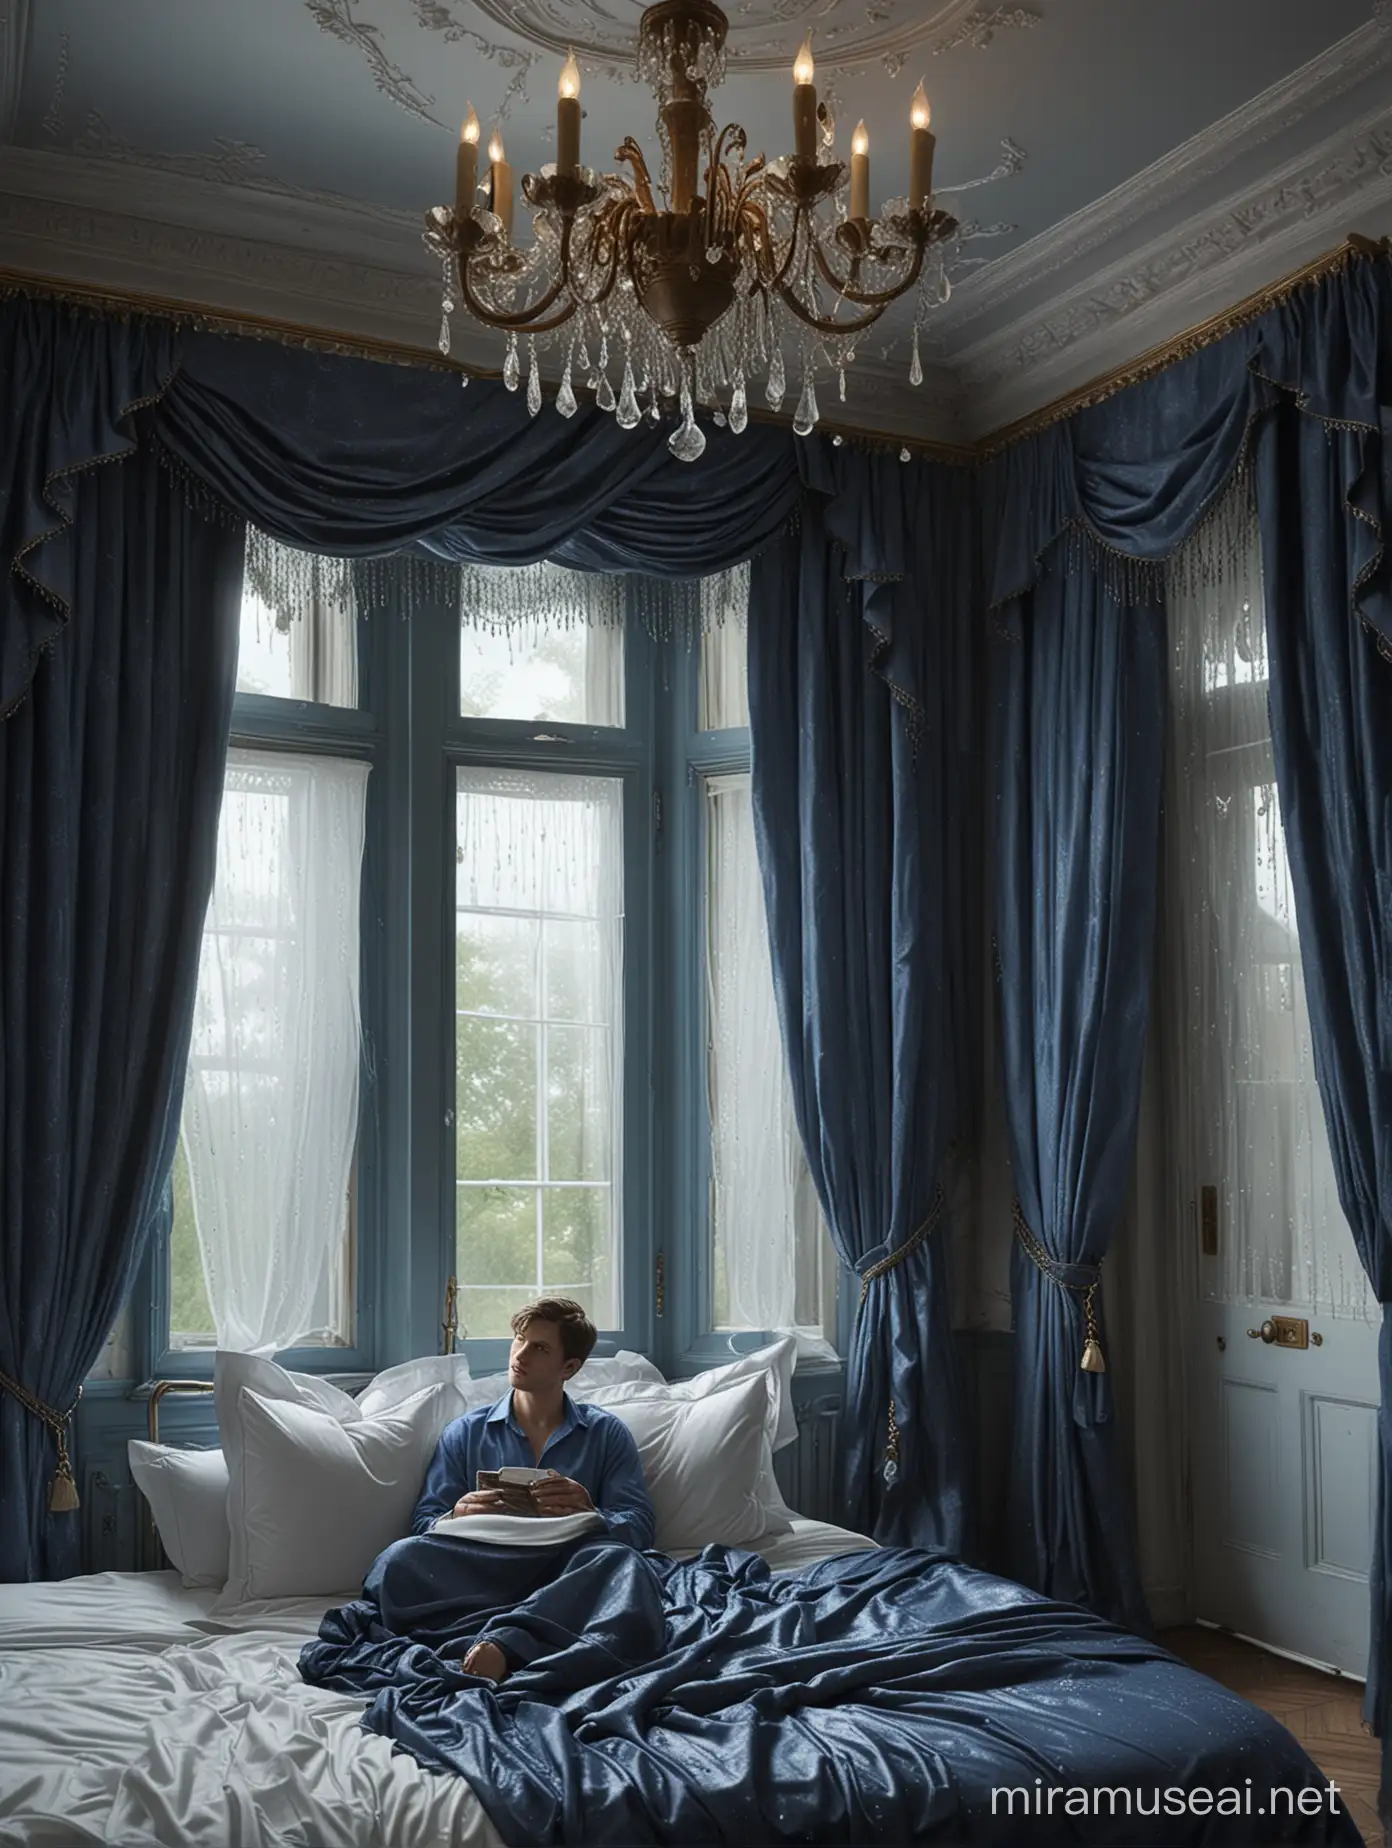 Luxurious Sapphire Bedroom with Handsome Man in Rainy Daylight